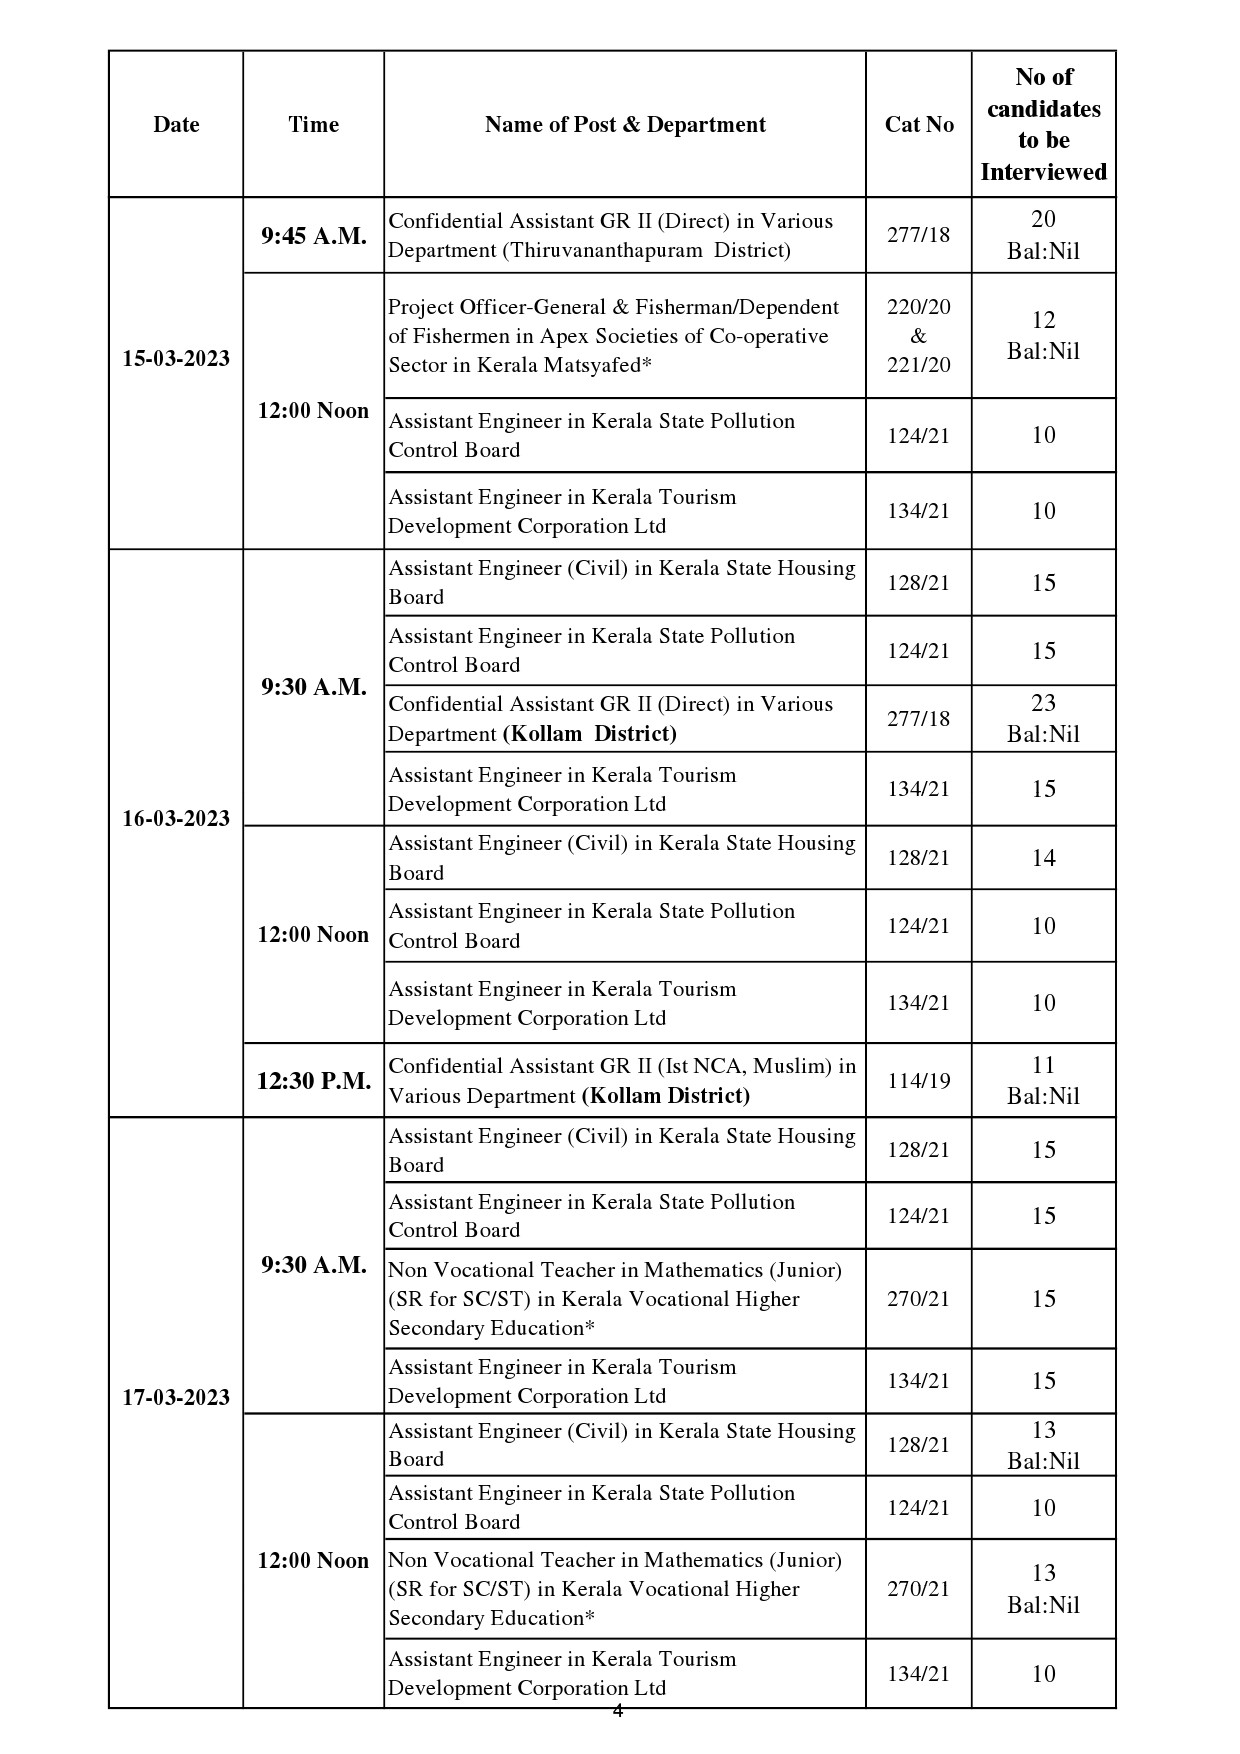 Interview Programme For The Month Of March 2023 - Notification Image 4